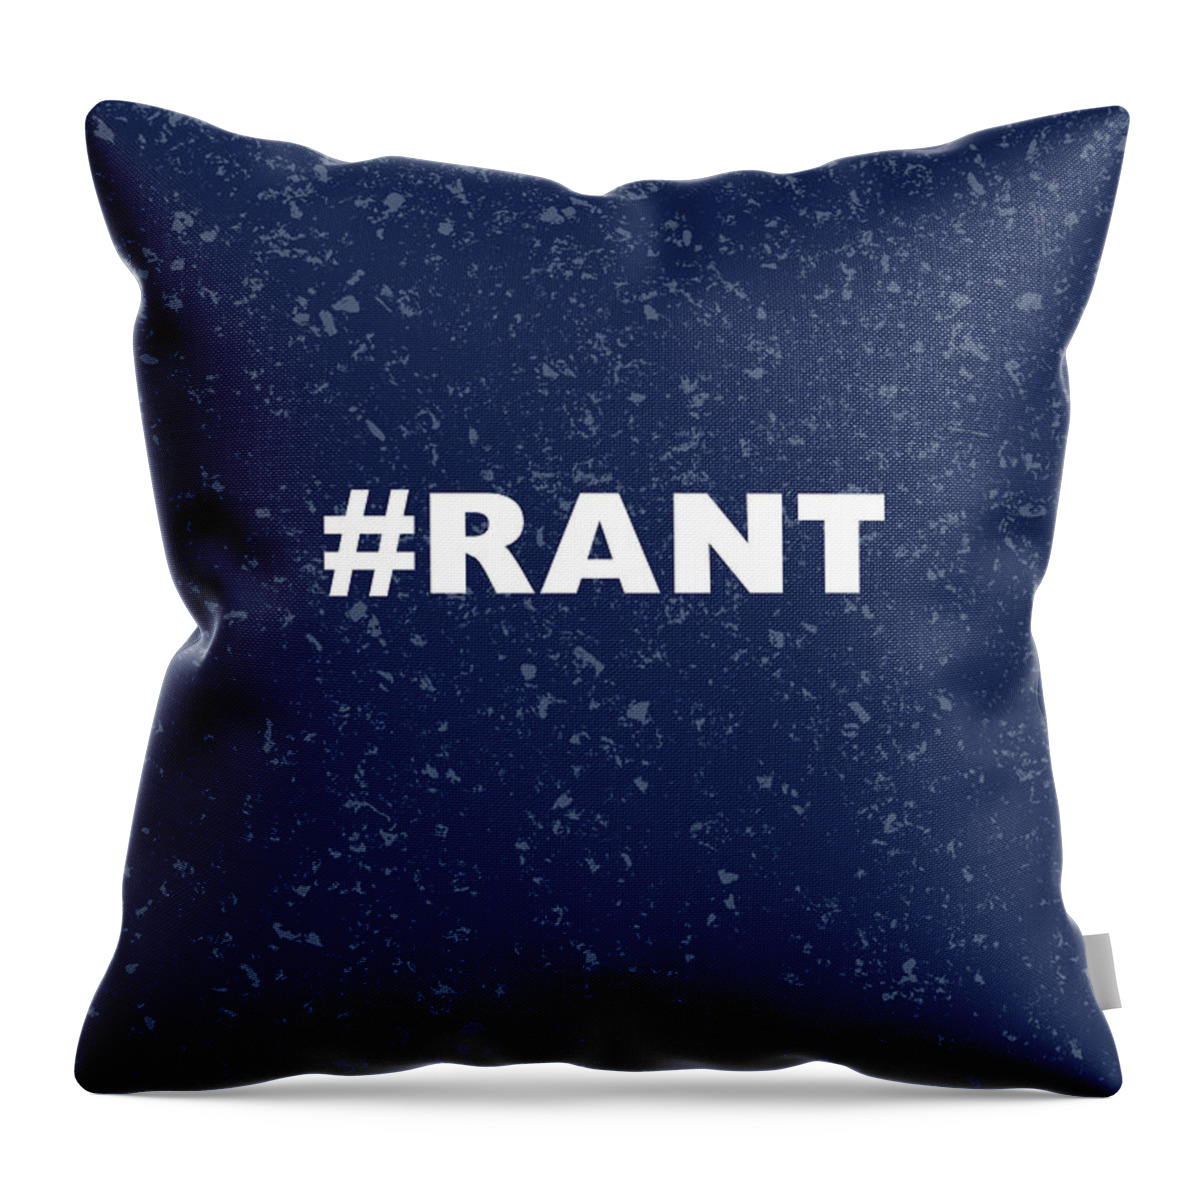 Hashtag Rant Throw Pillow featuring the digital art Rant Journal- Art by Linda Woods by Linda Woods